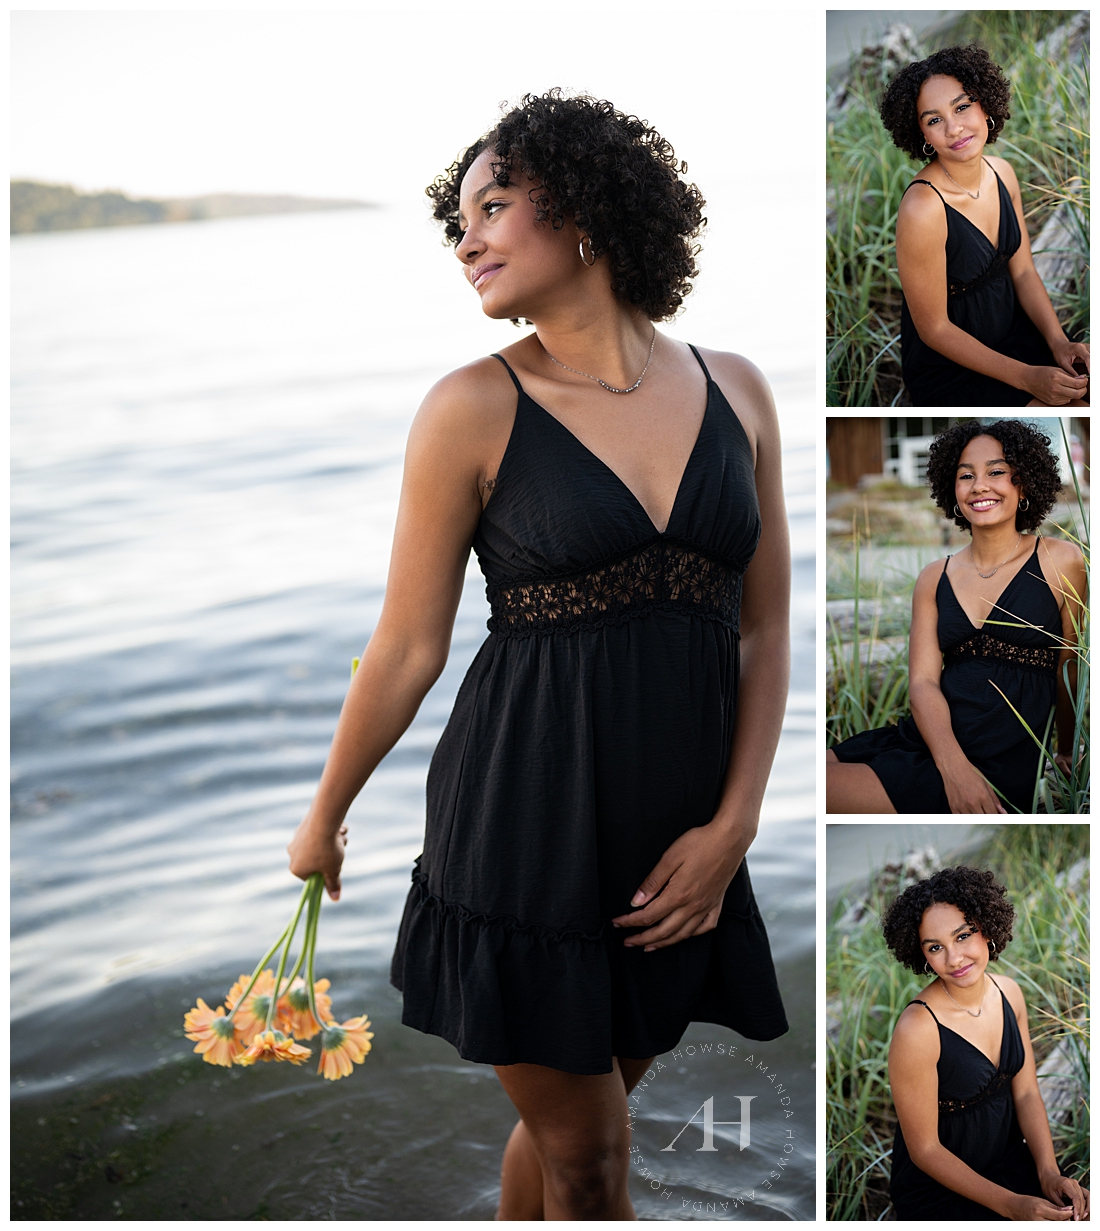 Outdoor Senior Portrait Locations Next to the Water | Dunes Park | Amanda Howse Photography 